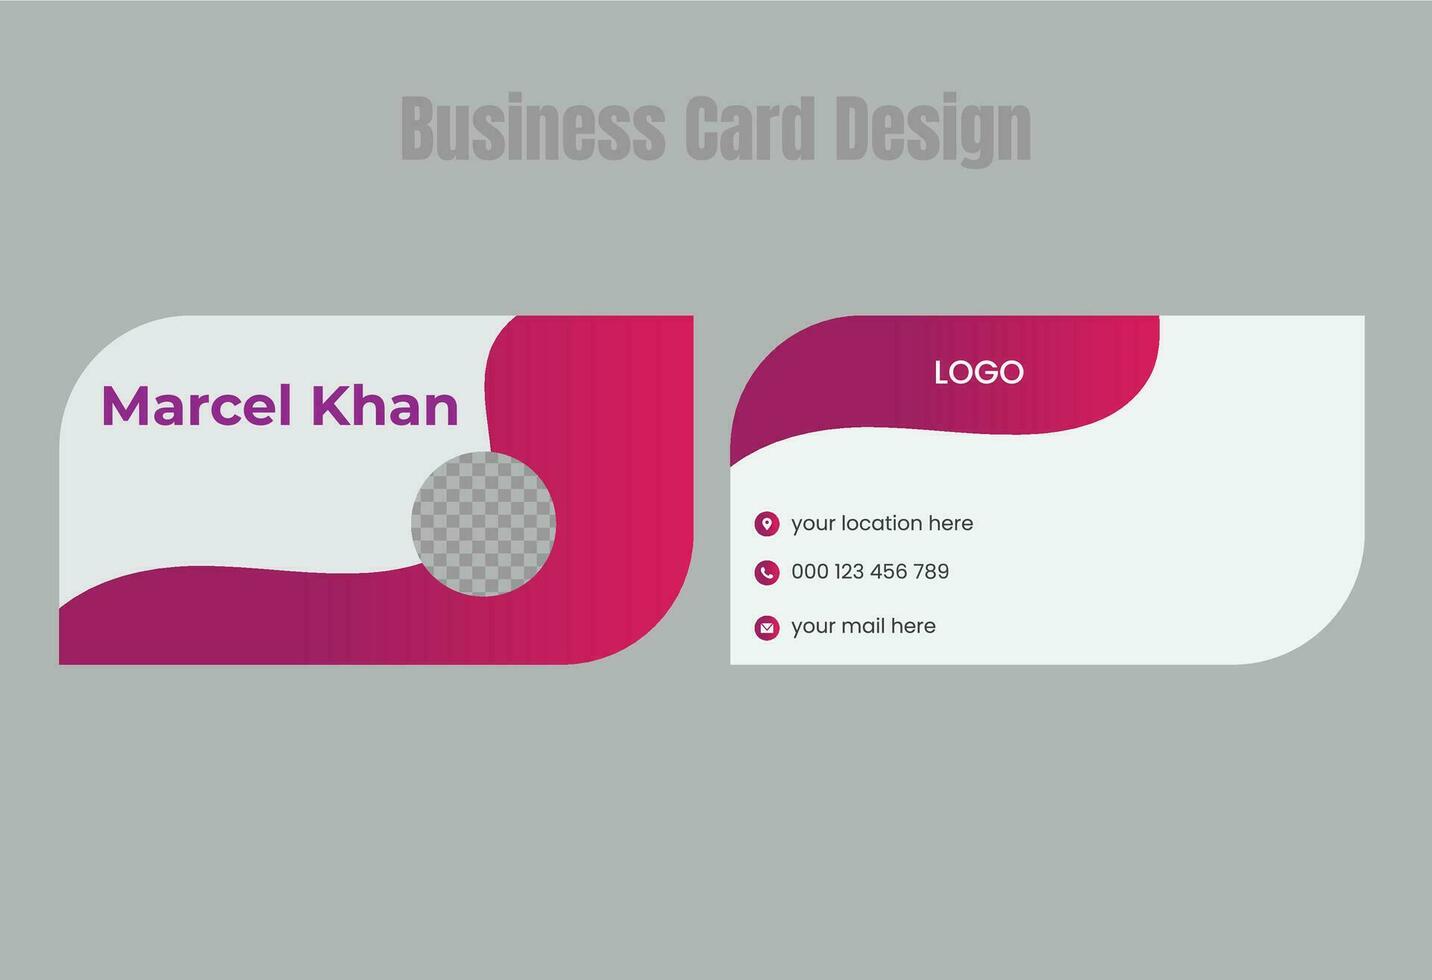 Business card design template, Clean professional business card template, visiting card, business card template. vector